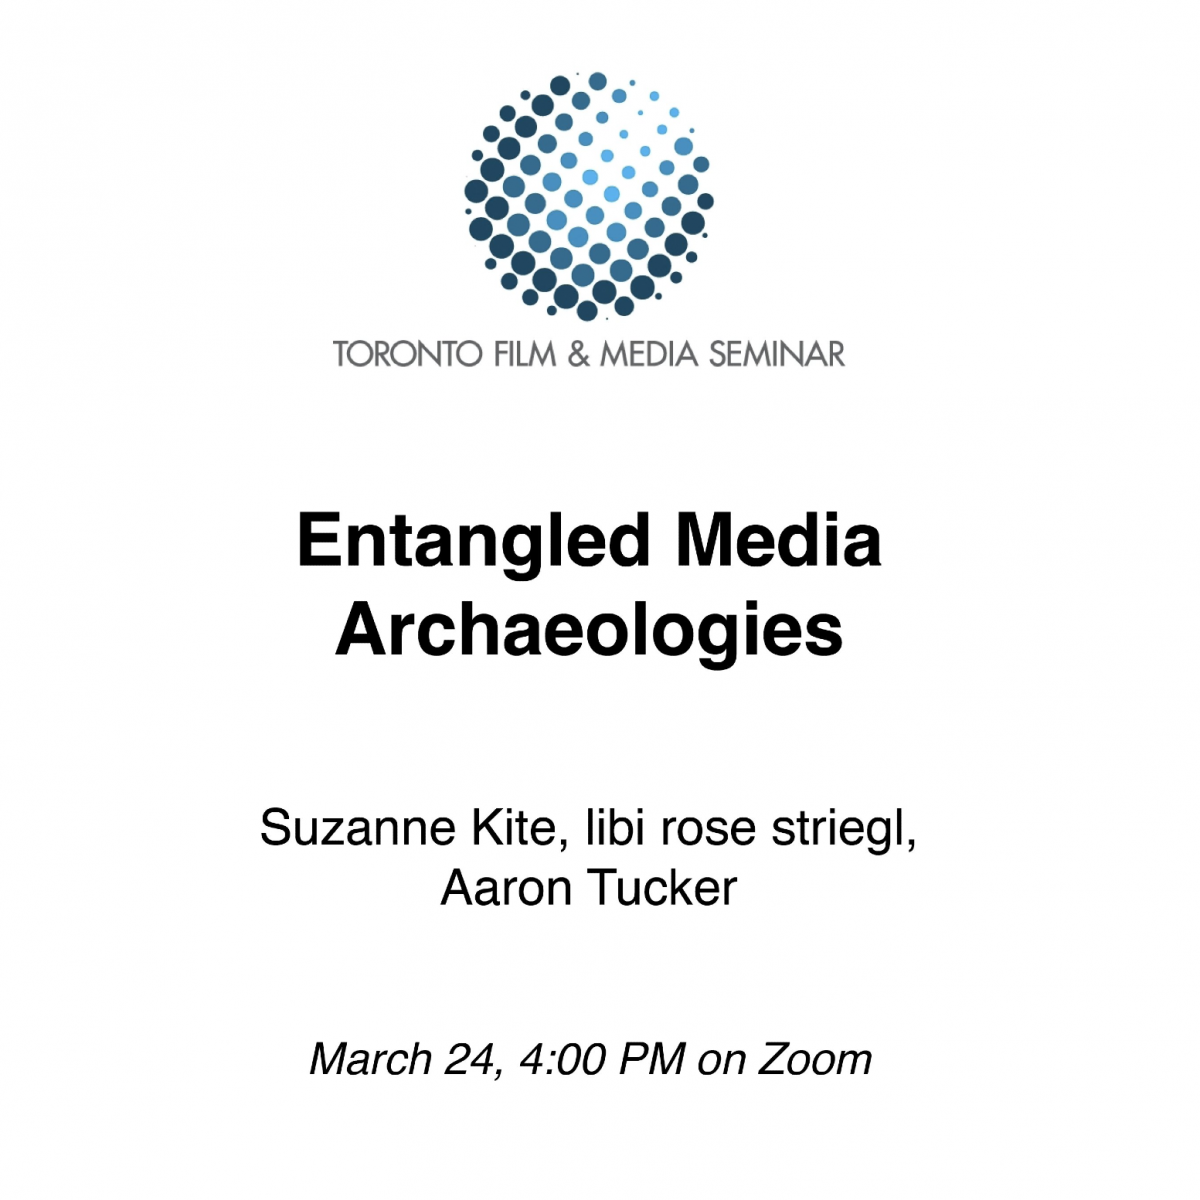 A promotional graphic featuring the text "Toronto Film & Media Seminar" at the top under a blue halftone circle and the text "Entangled Media Archeologies" in bold black font in the centre. All of the text is set against a plain white background.